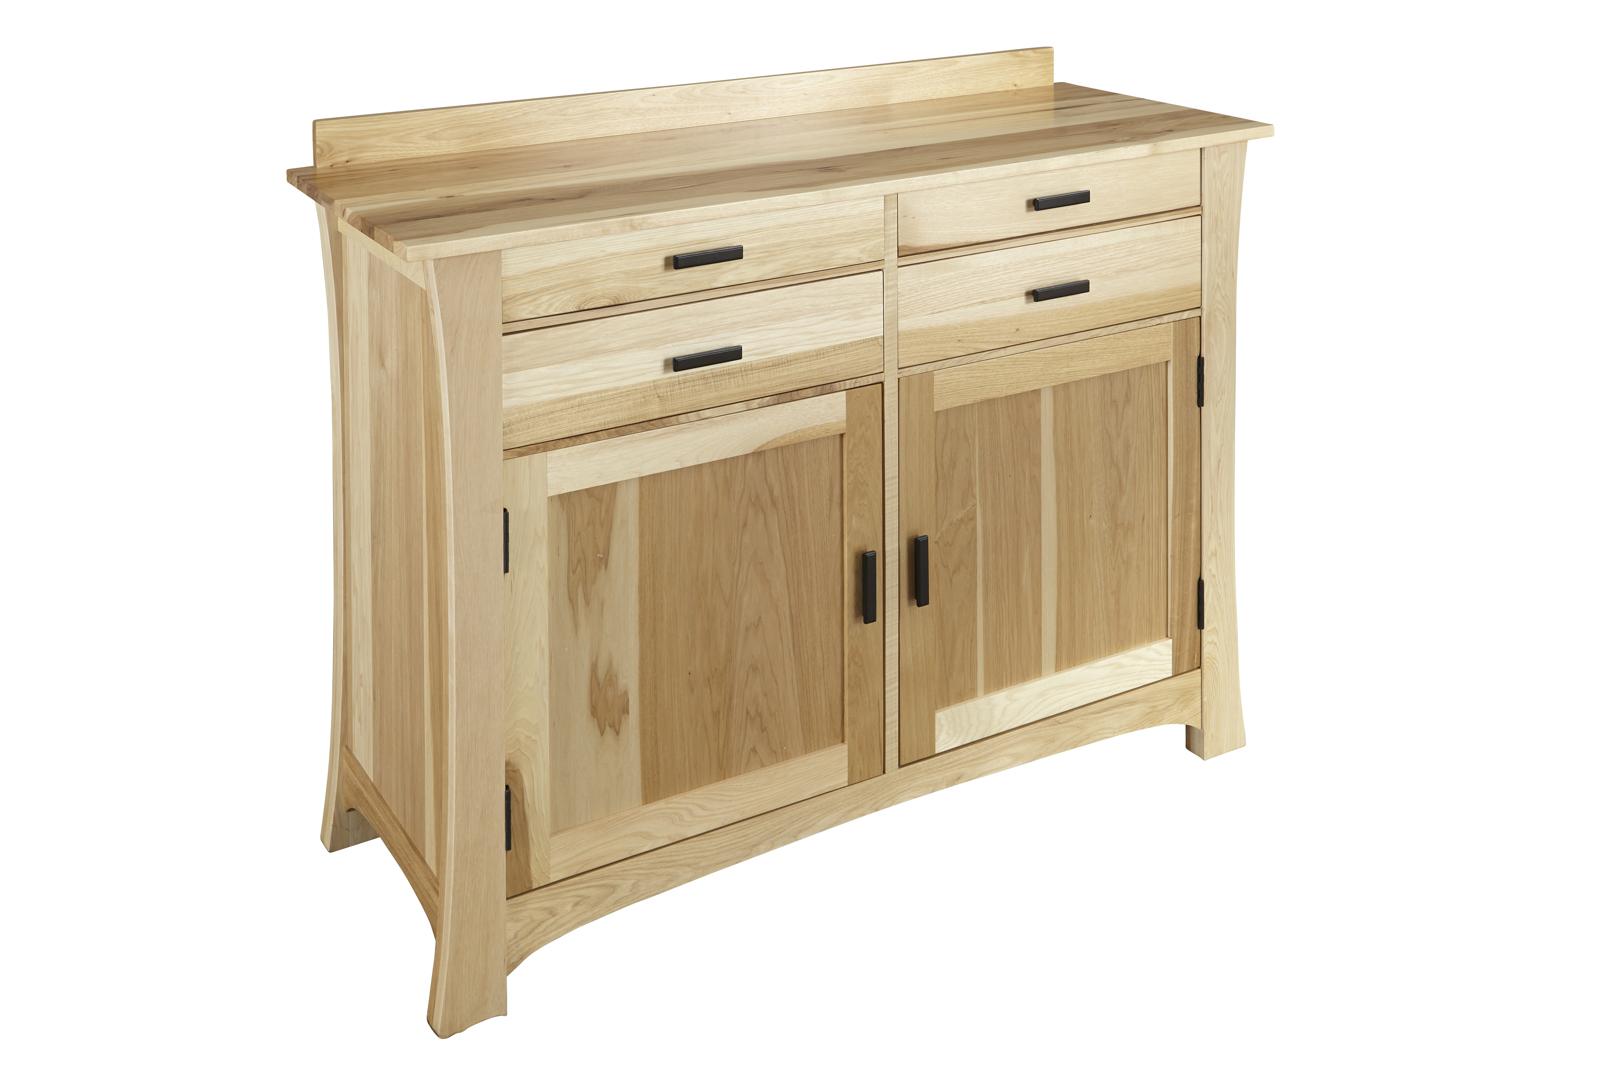 Rustic Sideboard Cattail Bungalow Natural CATNT9010 in Natural 